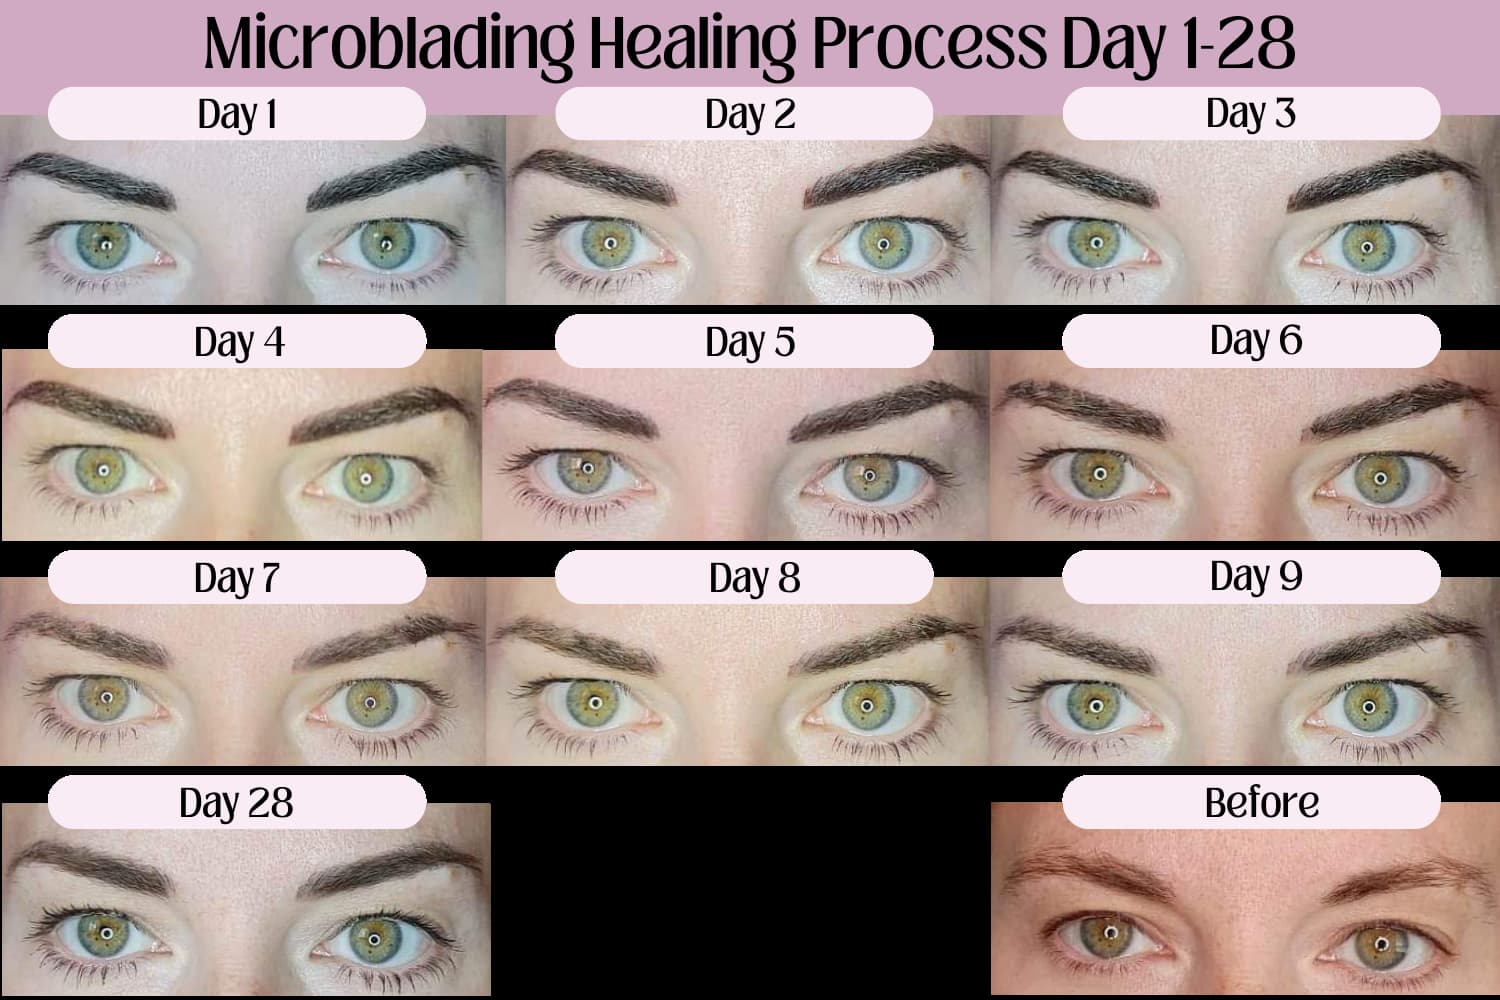 microblading healing process day by day images